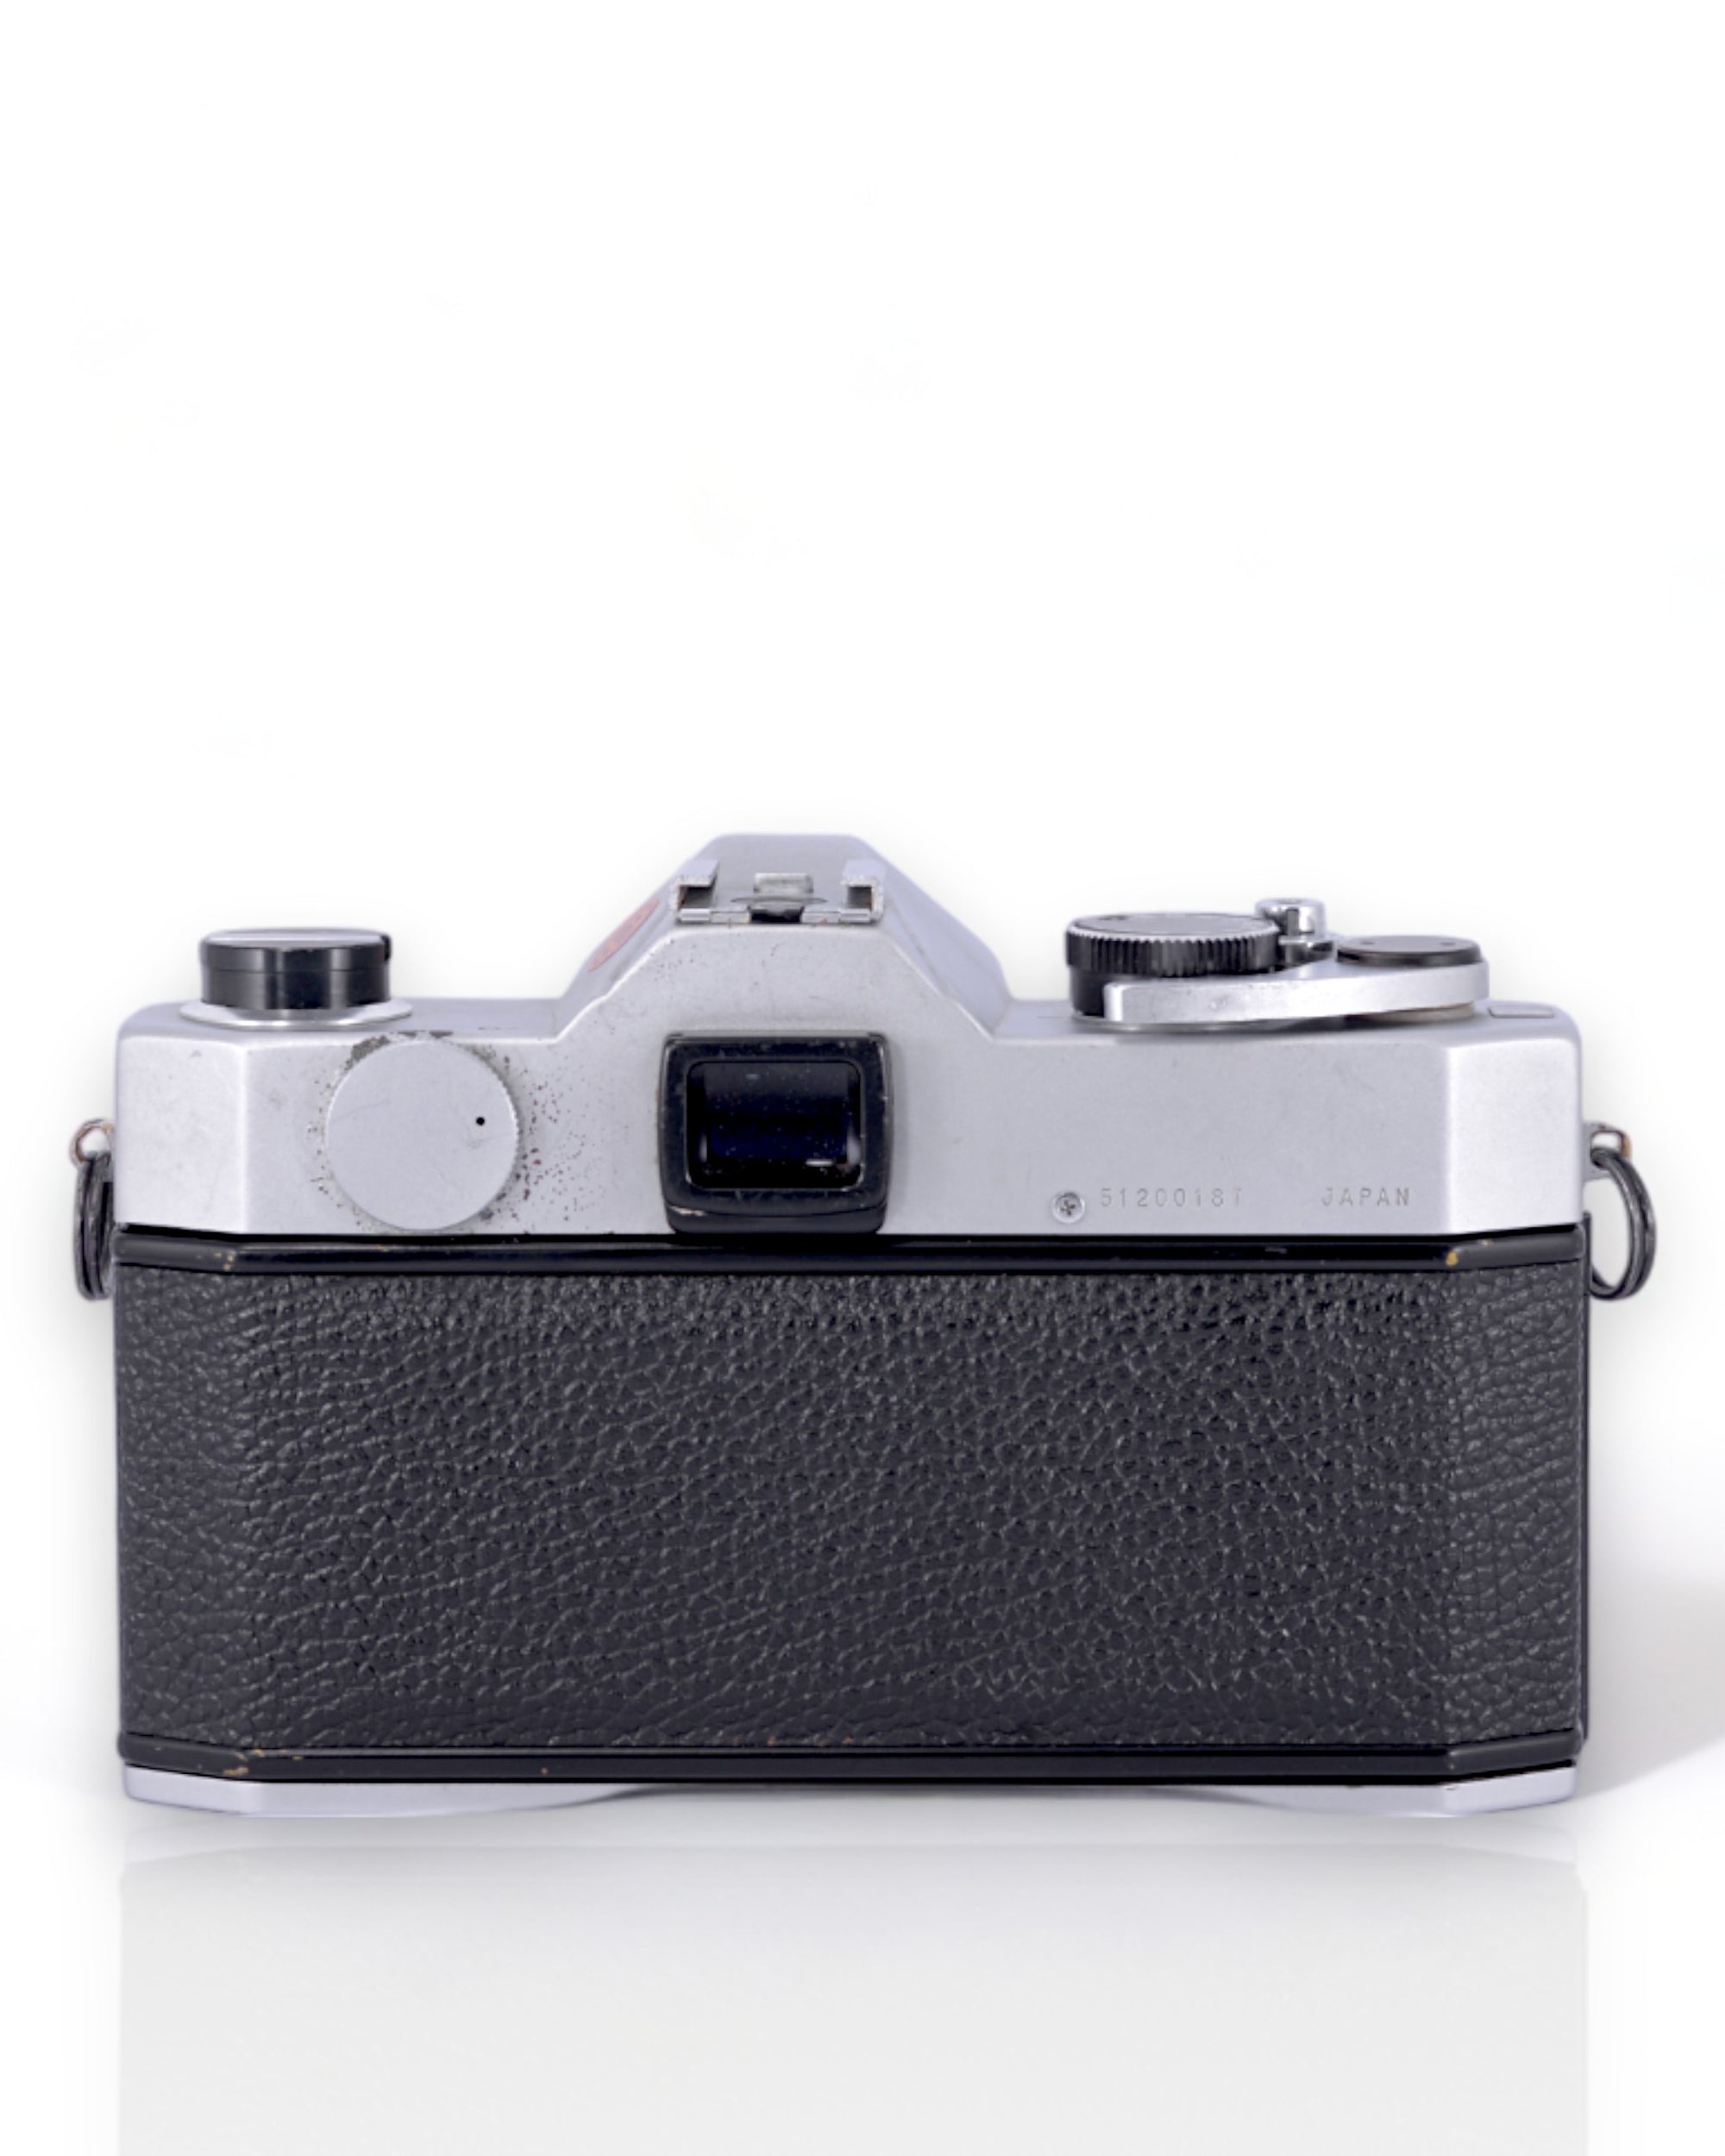 Yashica TL-Electro 35mm SLR film camera with 35mm f2.8 lens